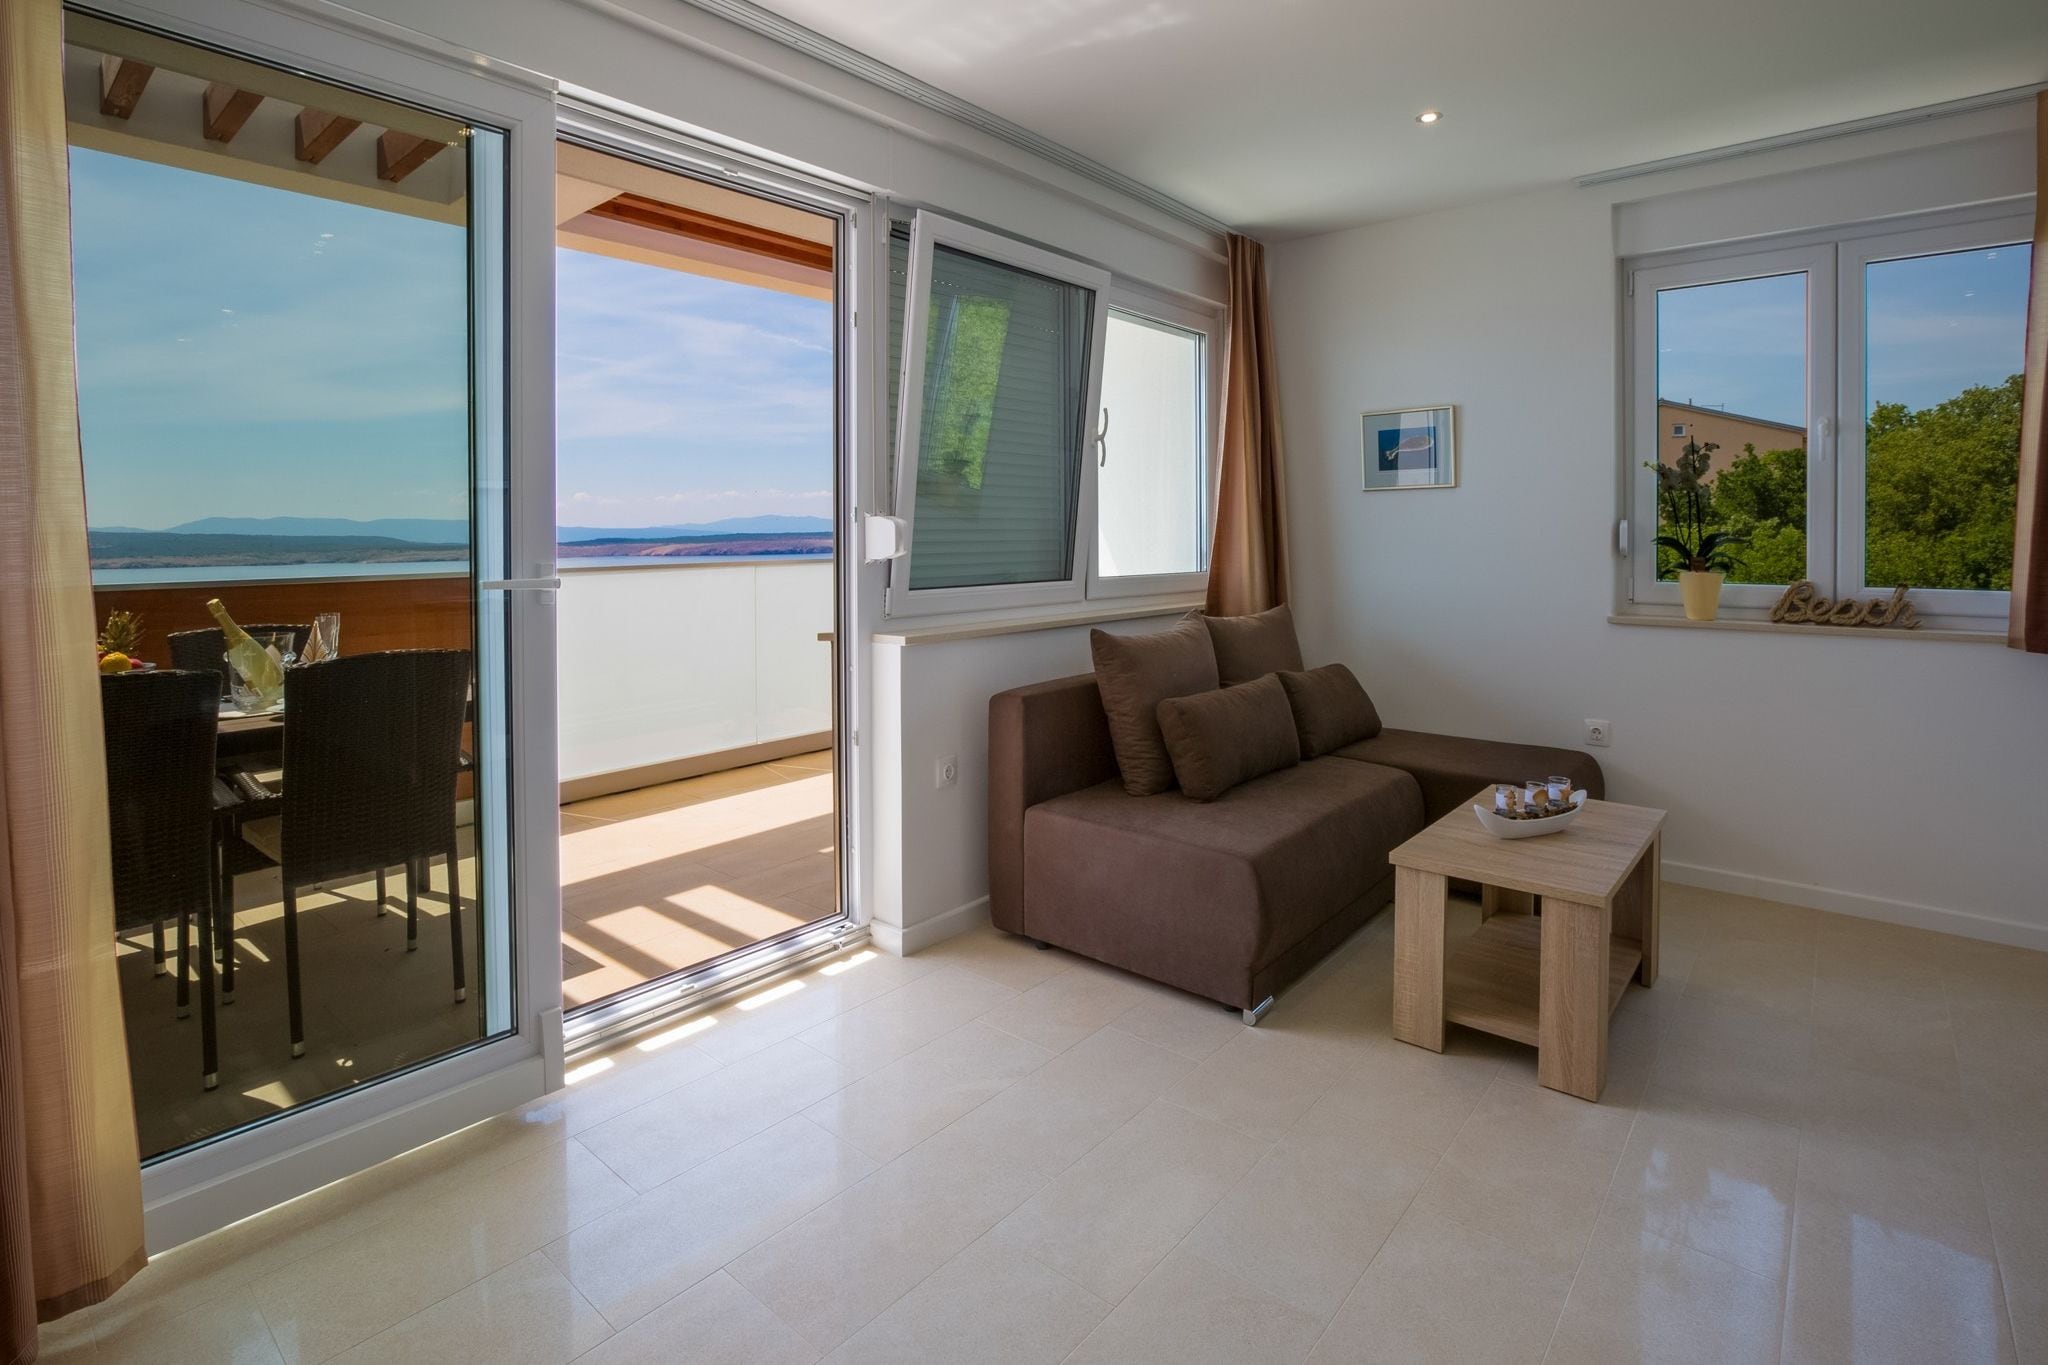 Beautiful villa apartment with swimming pool and sea view !